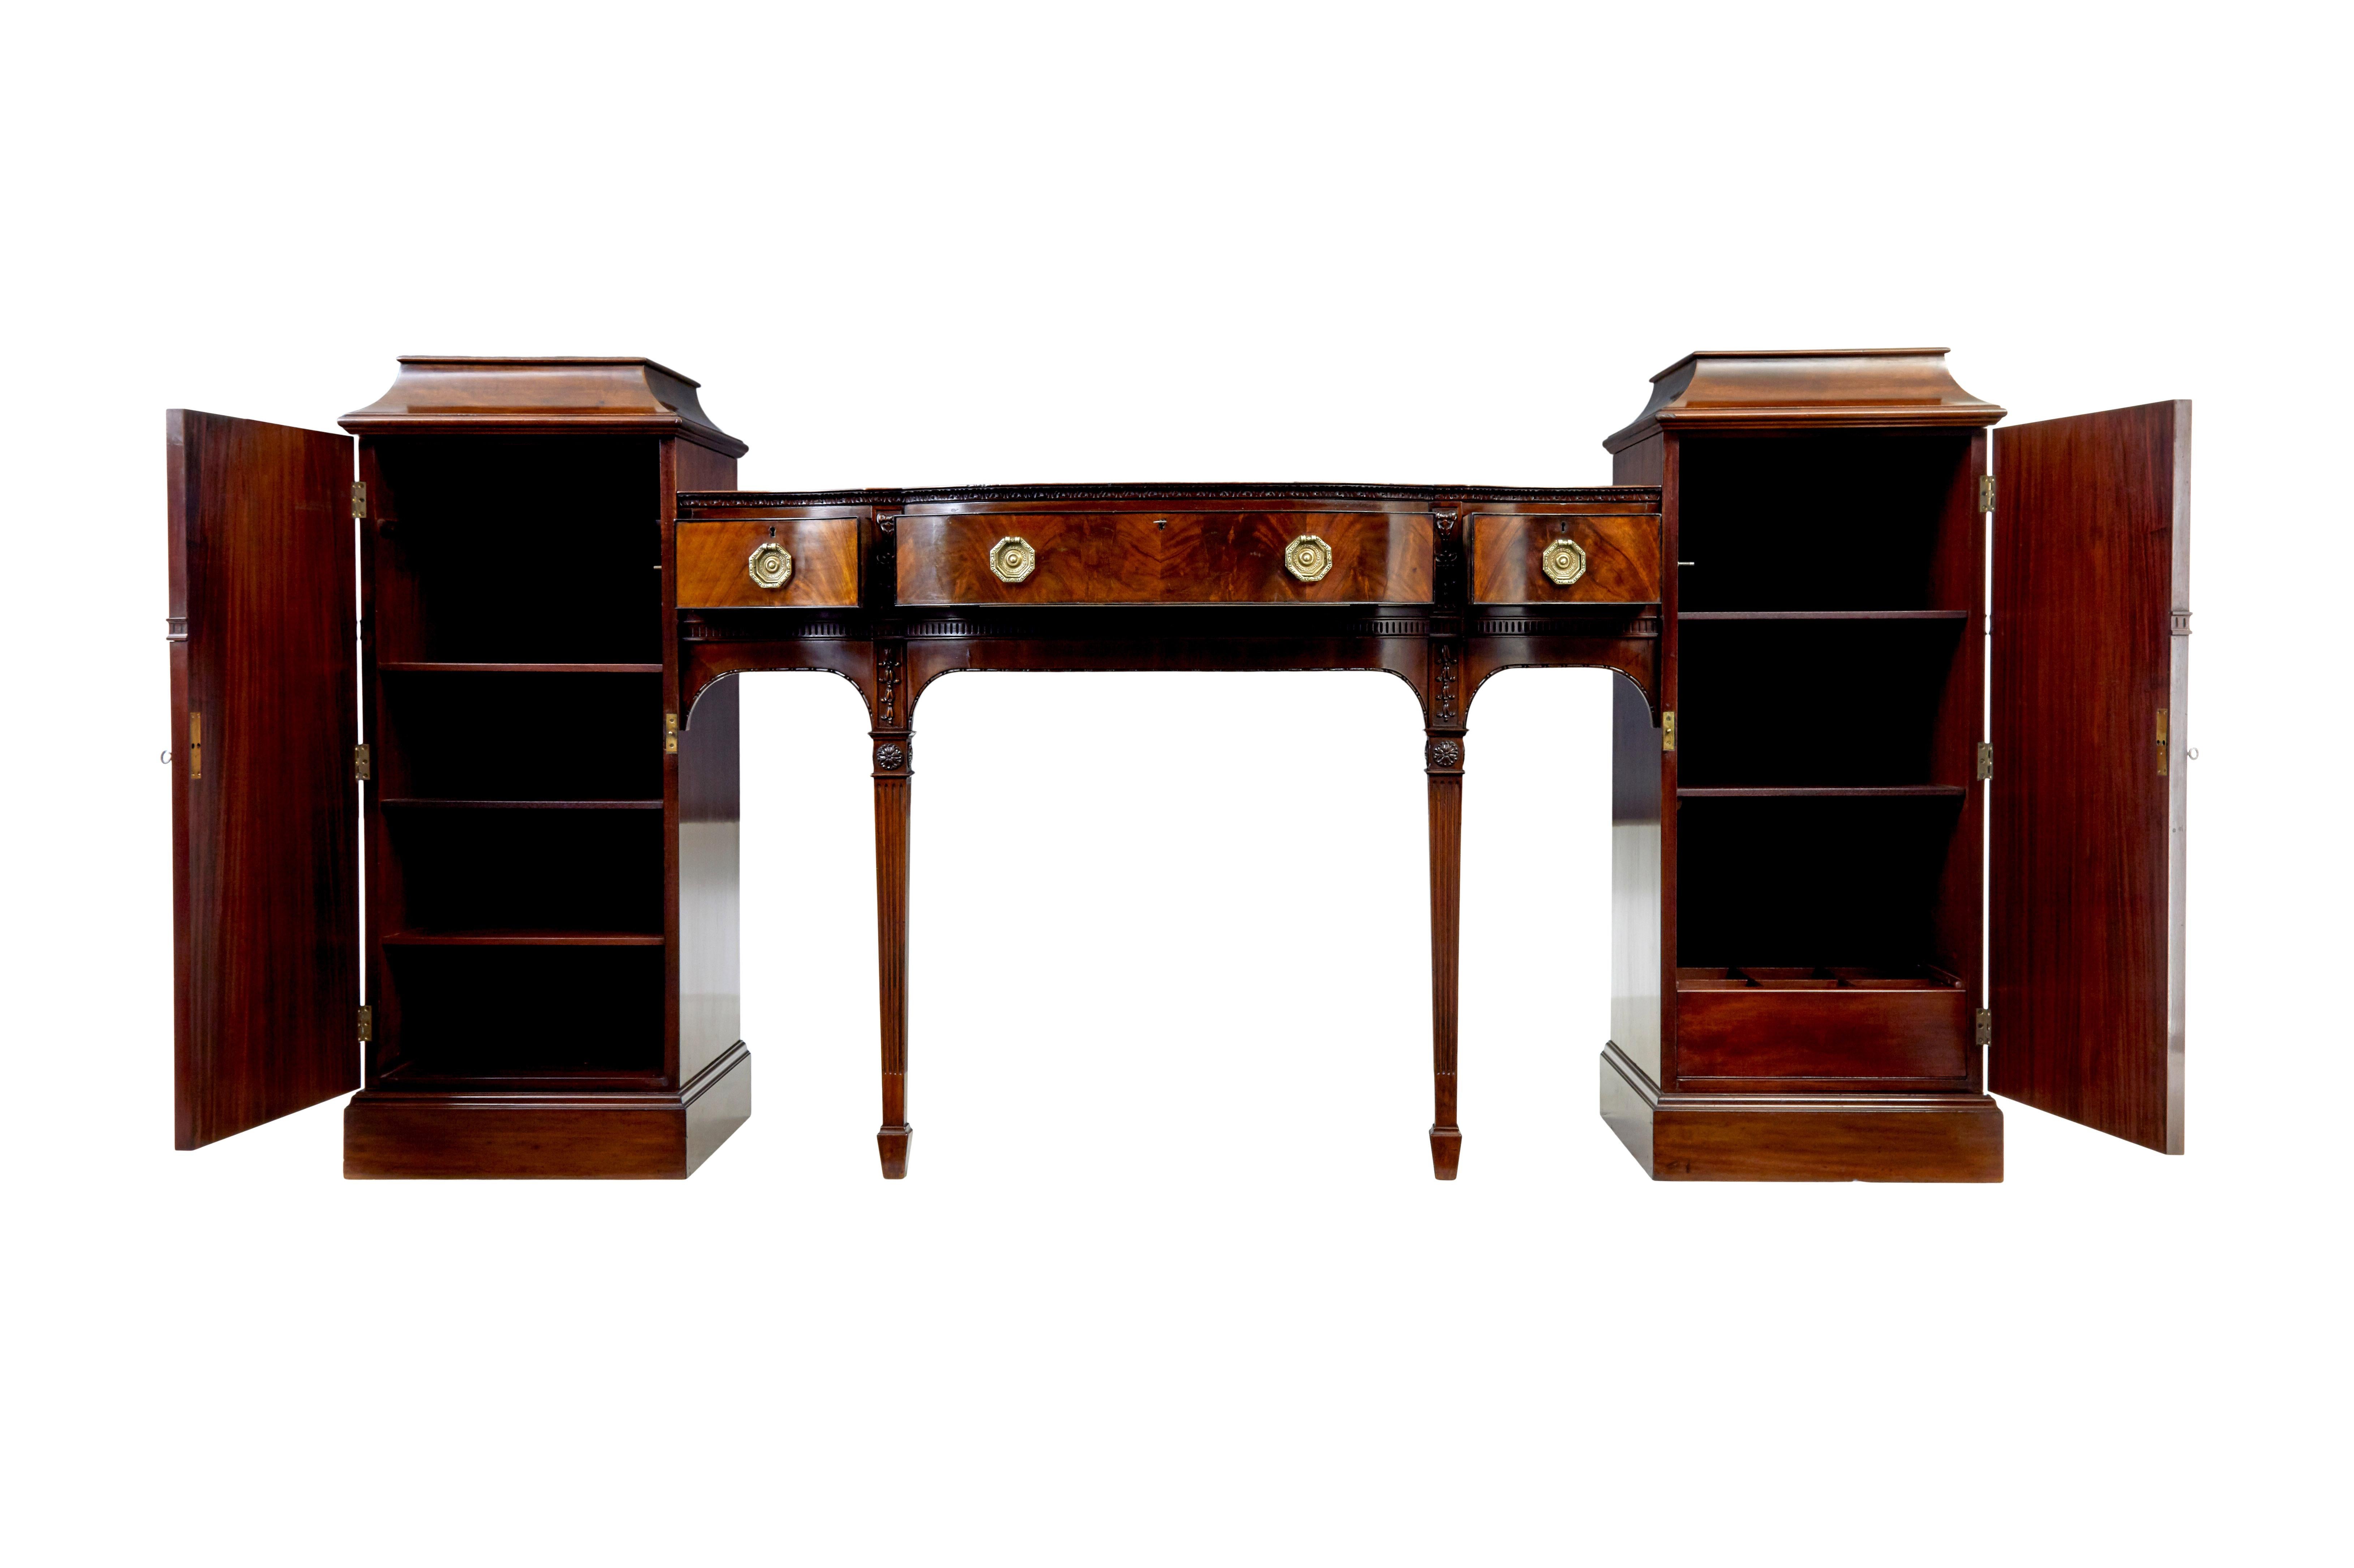 19th century adams revival carved mahogany pedestal sideboard circa 1880.

Comprising of 3 parts which fit together with dowel and screw.  Carved and decorated with applied swags and florals in the adams style.
Right hand pedestal with 2 shelves and